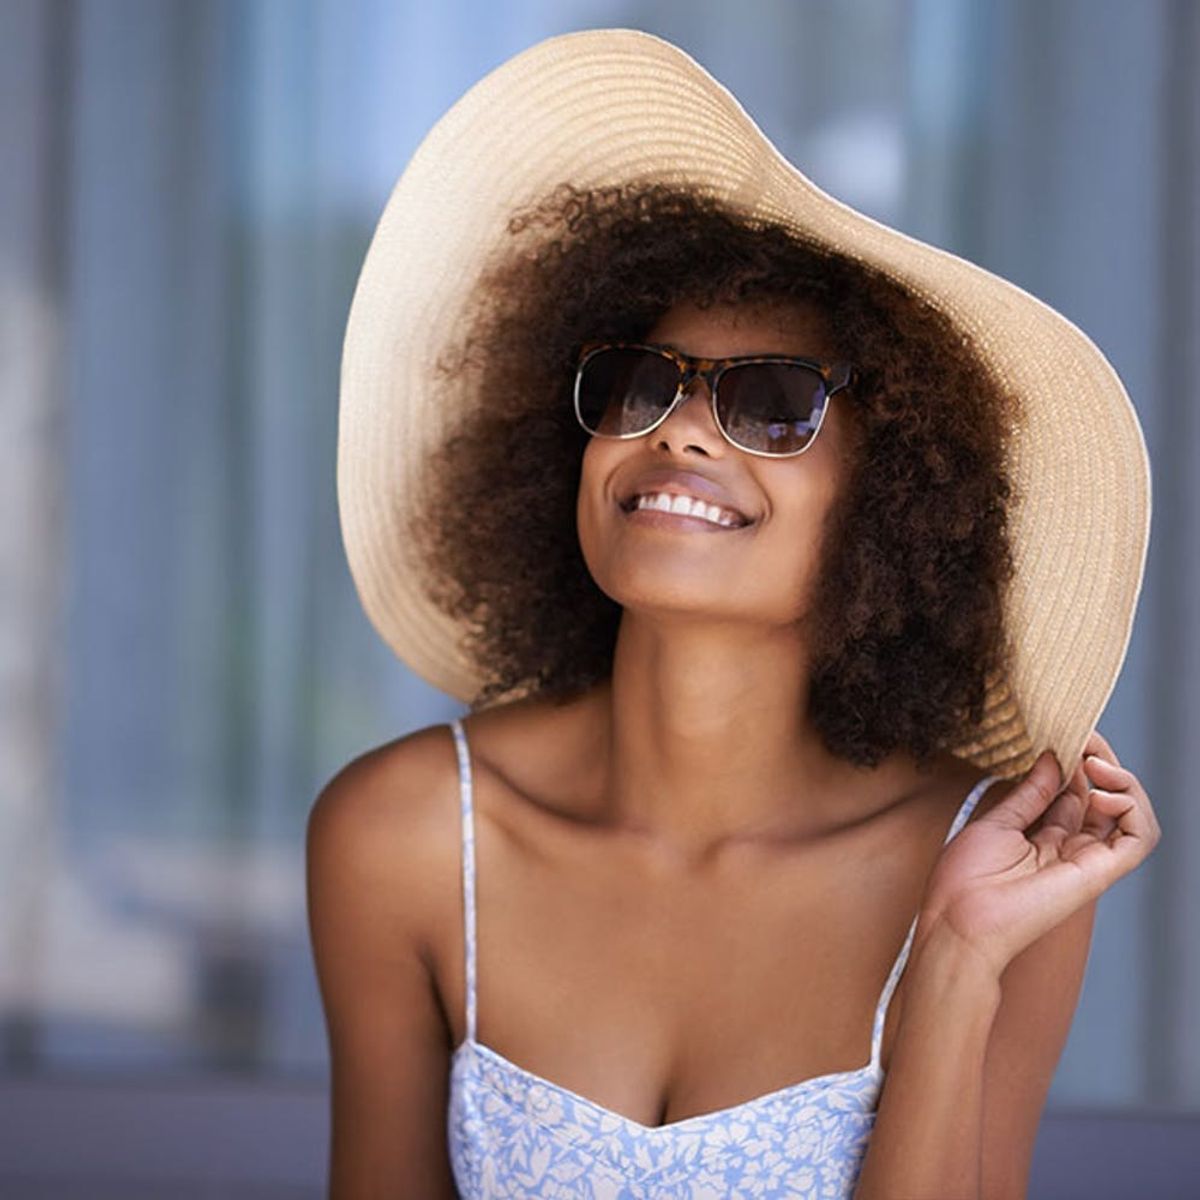 How to Buy Sunglasses That Will Actually Protect Your Eyes